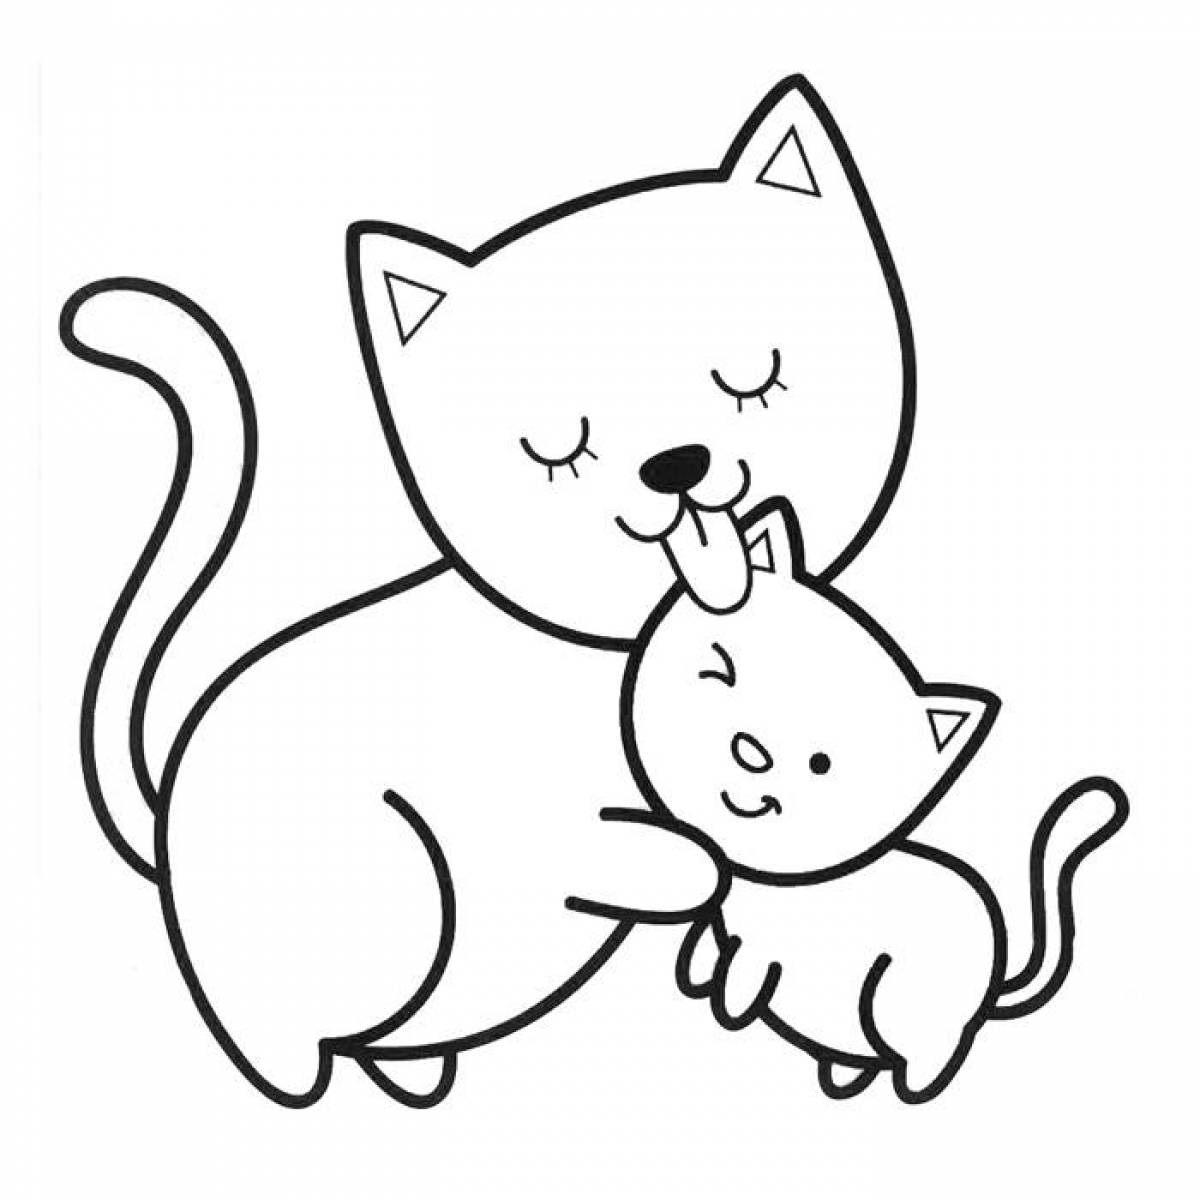 Snuggly coloring page cat for 3-4 year olds